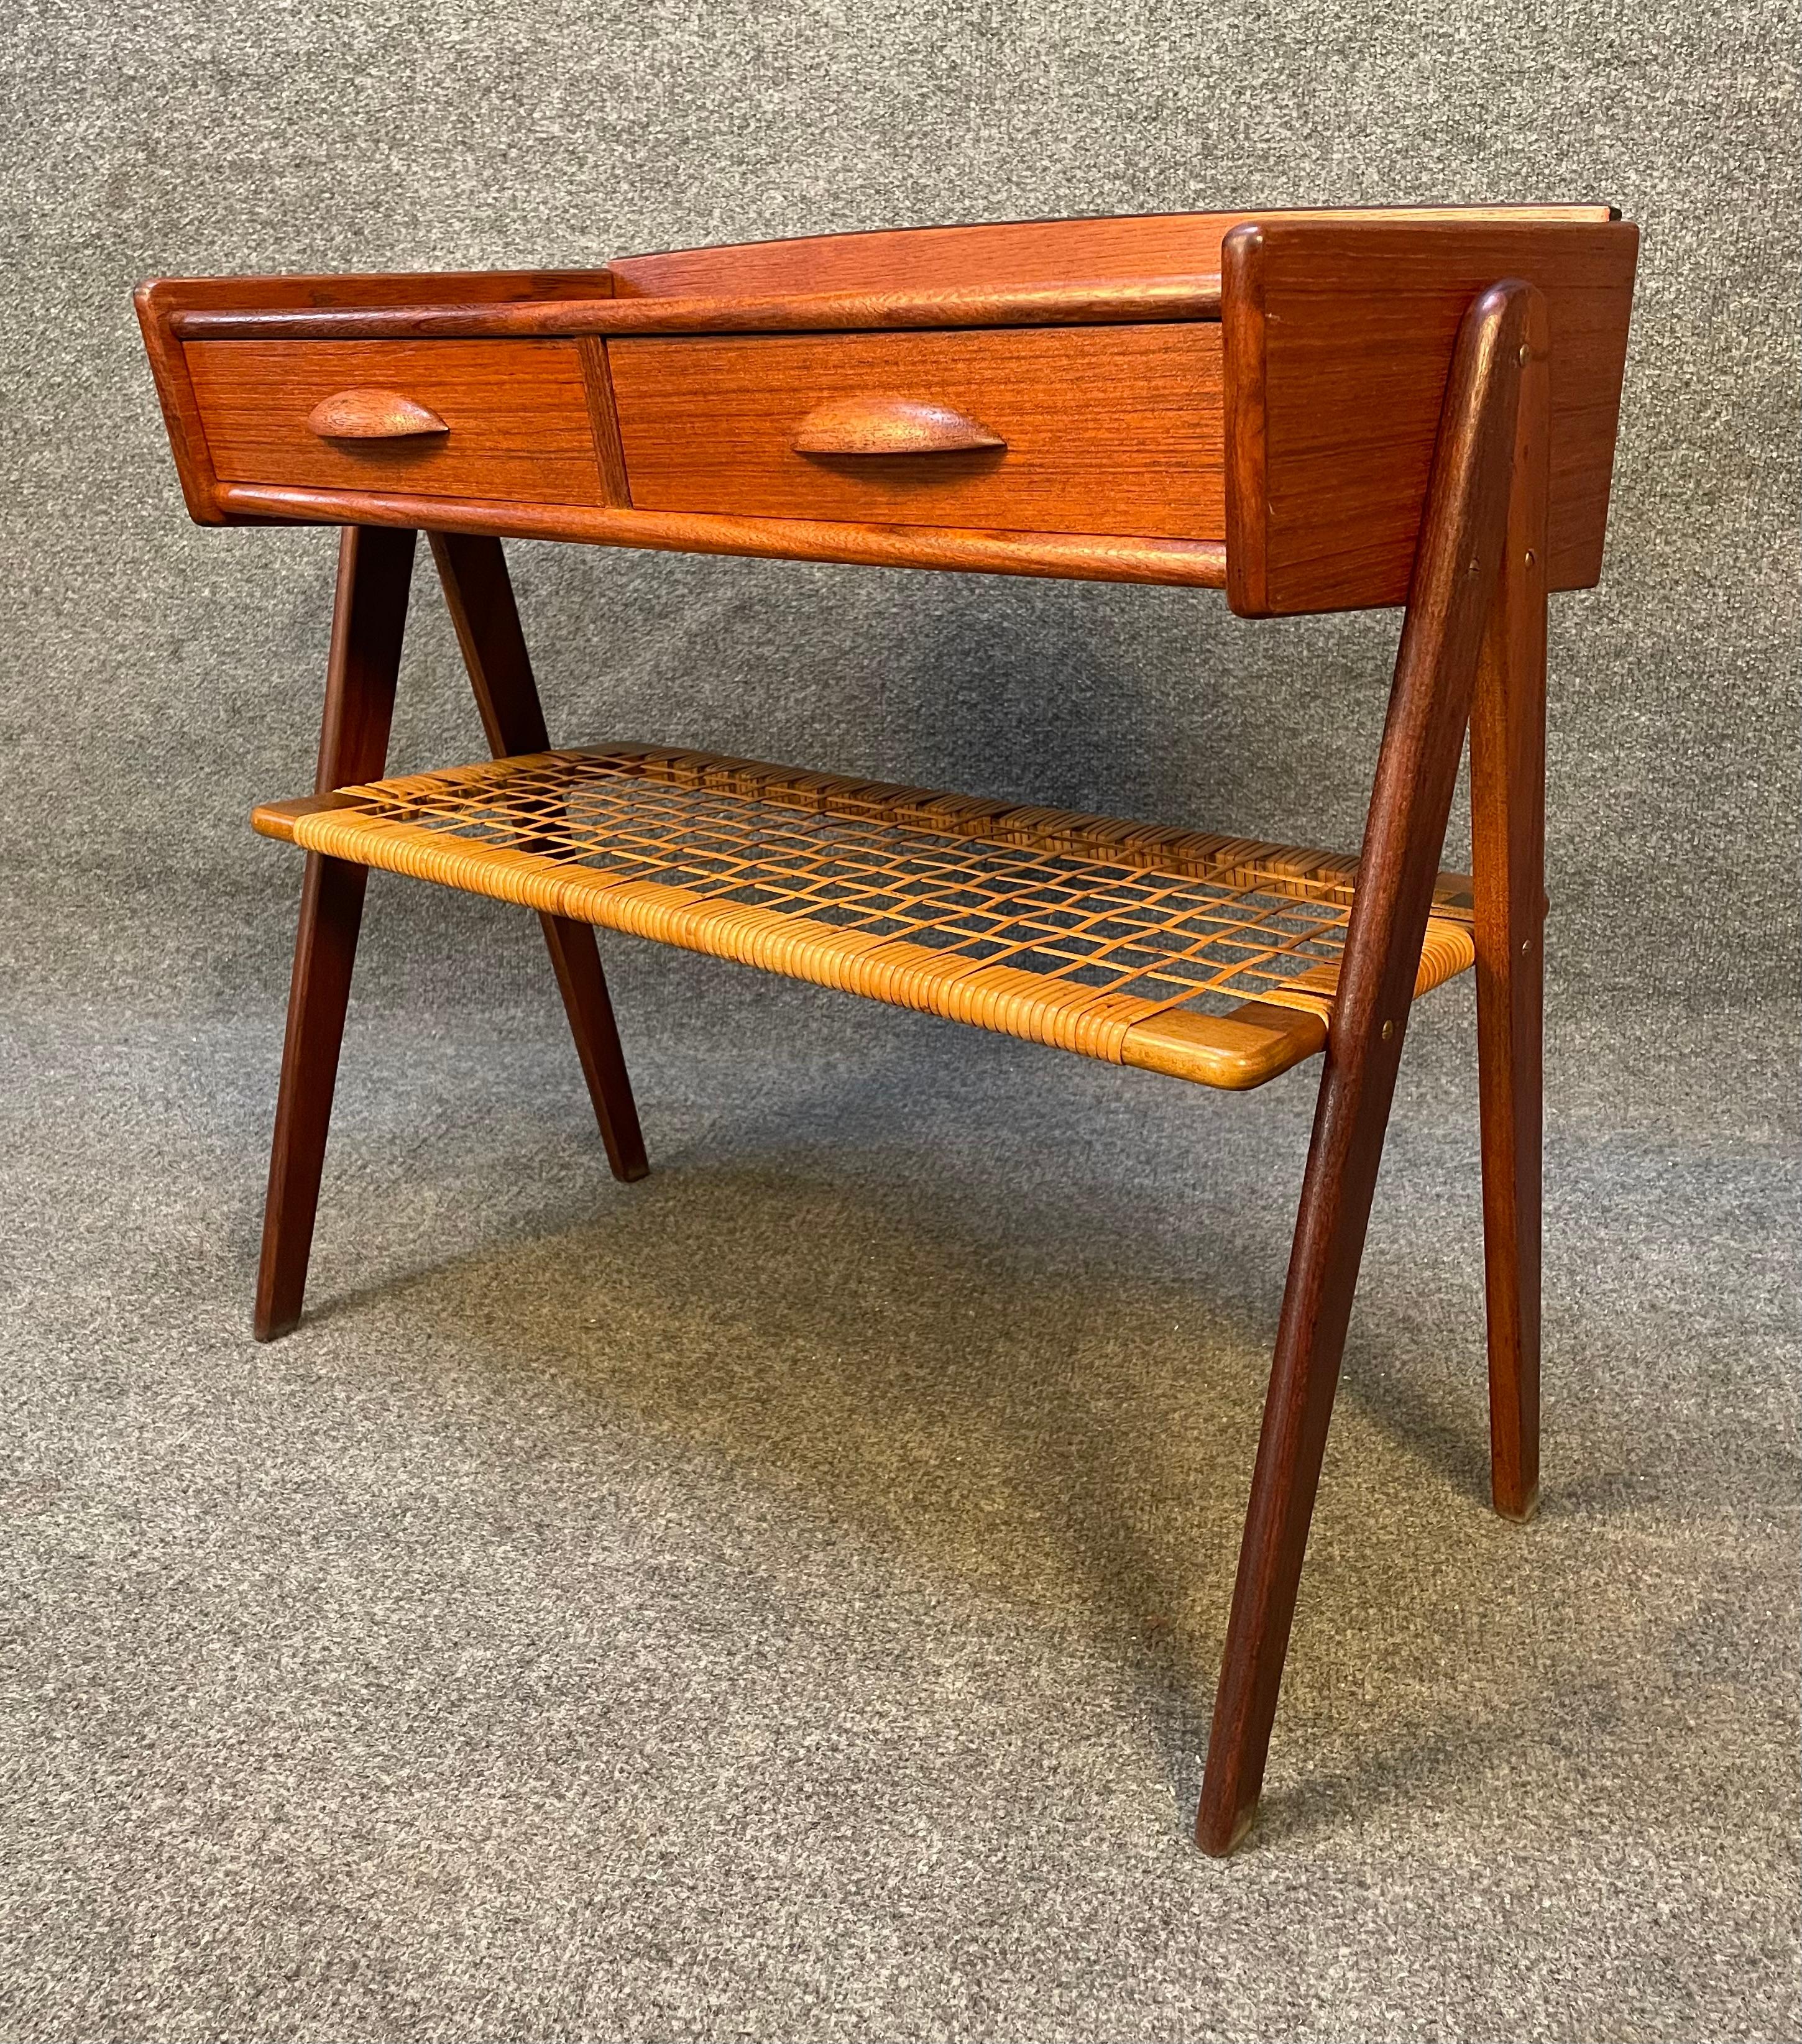 Here is a beautiful 1960's end table in teak designed by Soren Rasmussen.
This sculptural side table, fully refinished after its importation from Denmark to California, features a vibrant wood grain, two dove tail built drawers, a cane shelf and